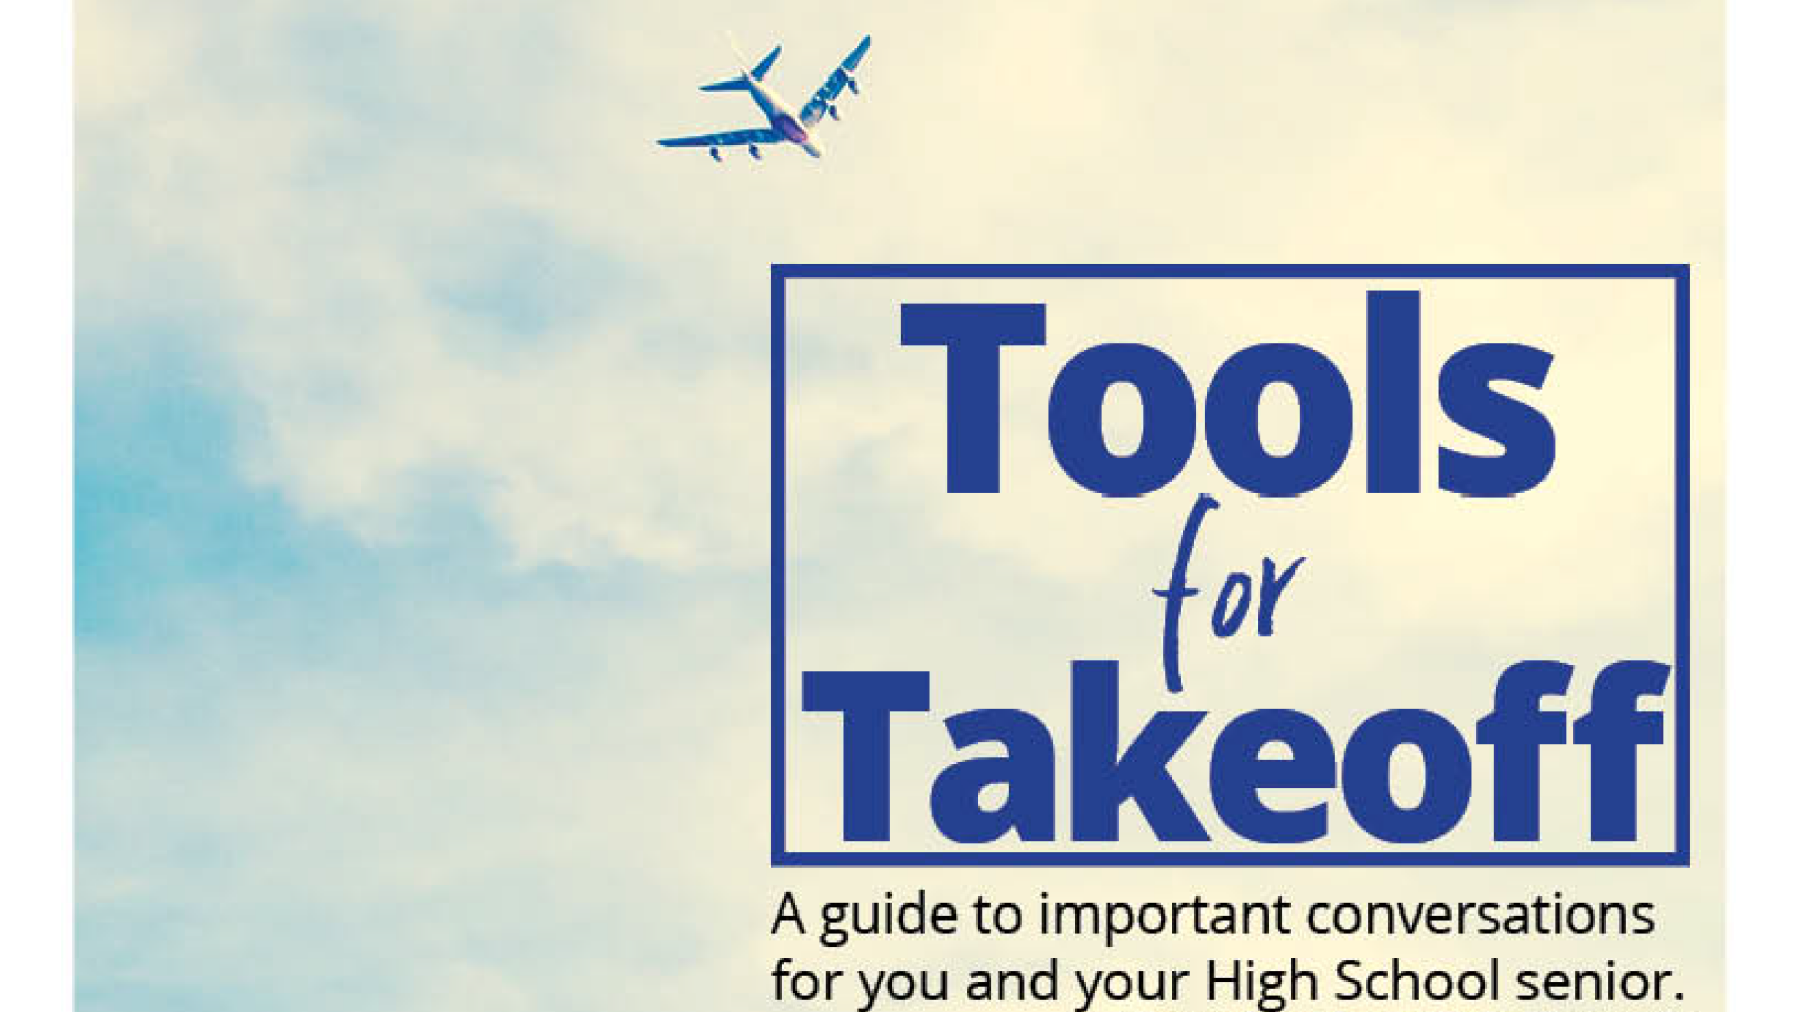 Tools 4 Takeoff Workshop for Parents of Seniors